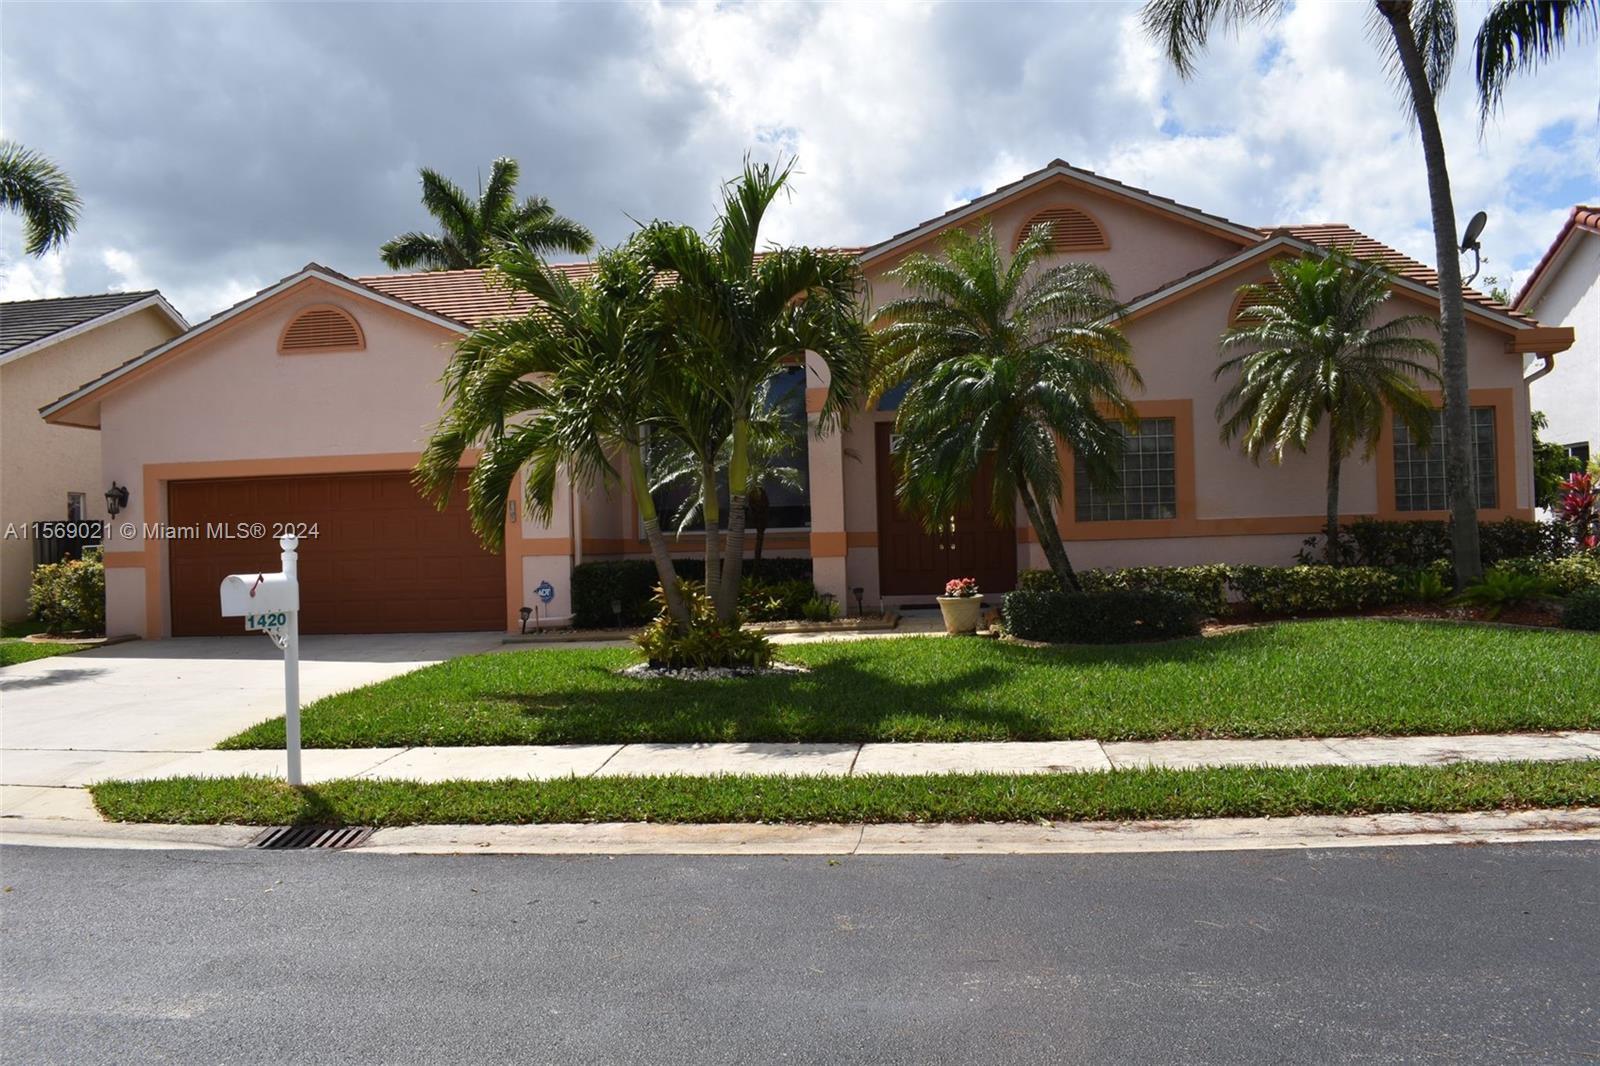 Photo of 1420 SW 104th Ave in Pembroke Pines, FL